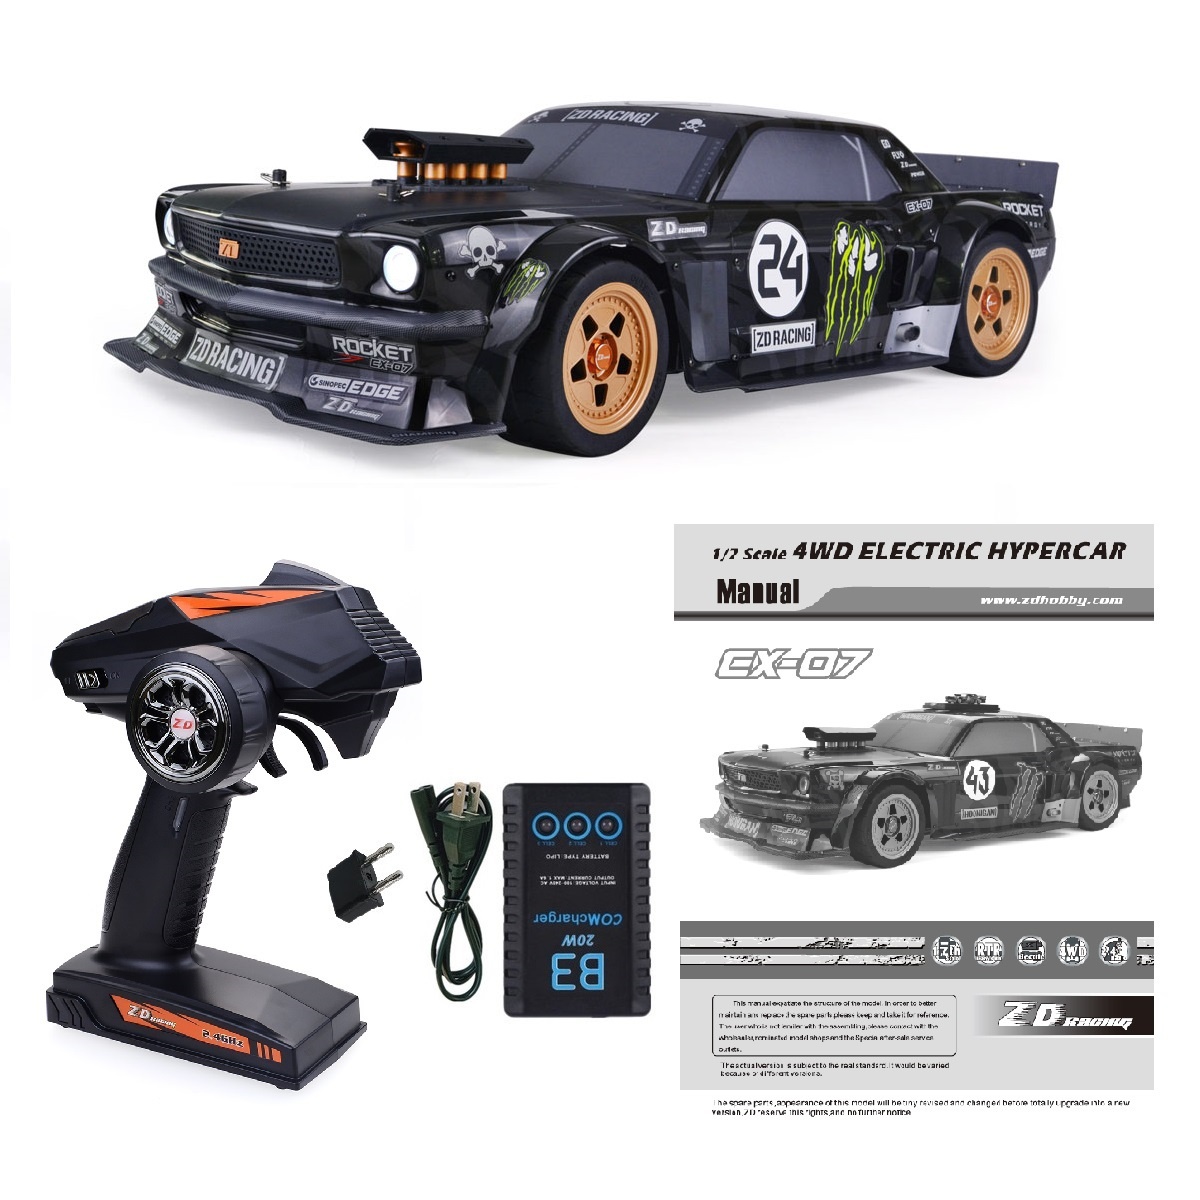 ZD Racing EX-07 1/7 SCALE 4WD ELECTRIC HYPERCAR